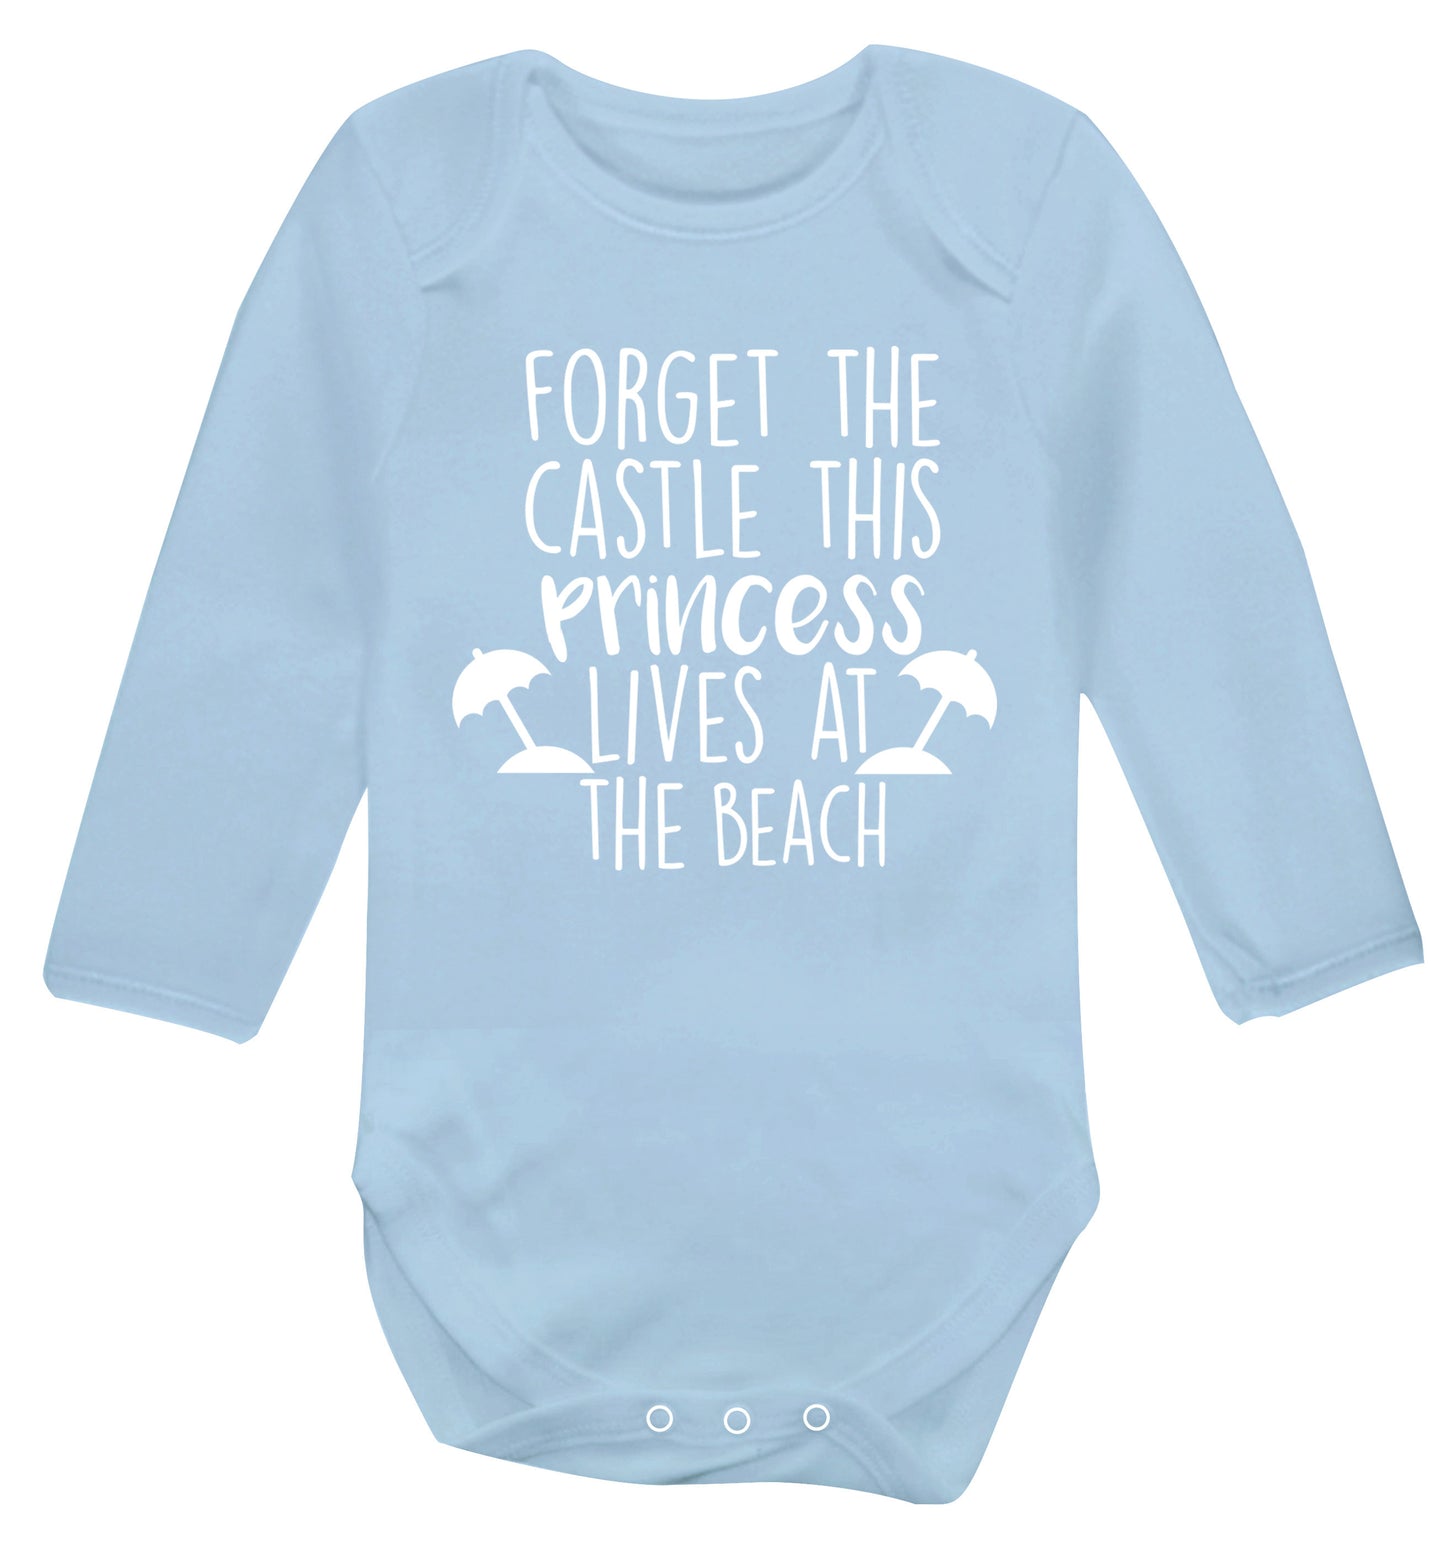 Forget the castle this princess lives at the beach Baby Vest long sleeved pale blue 6-12 months